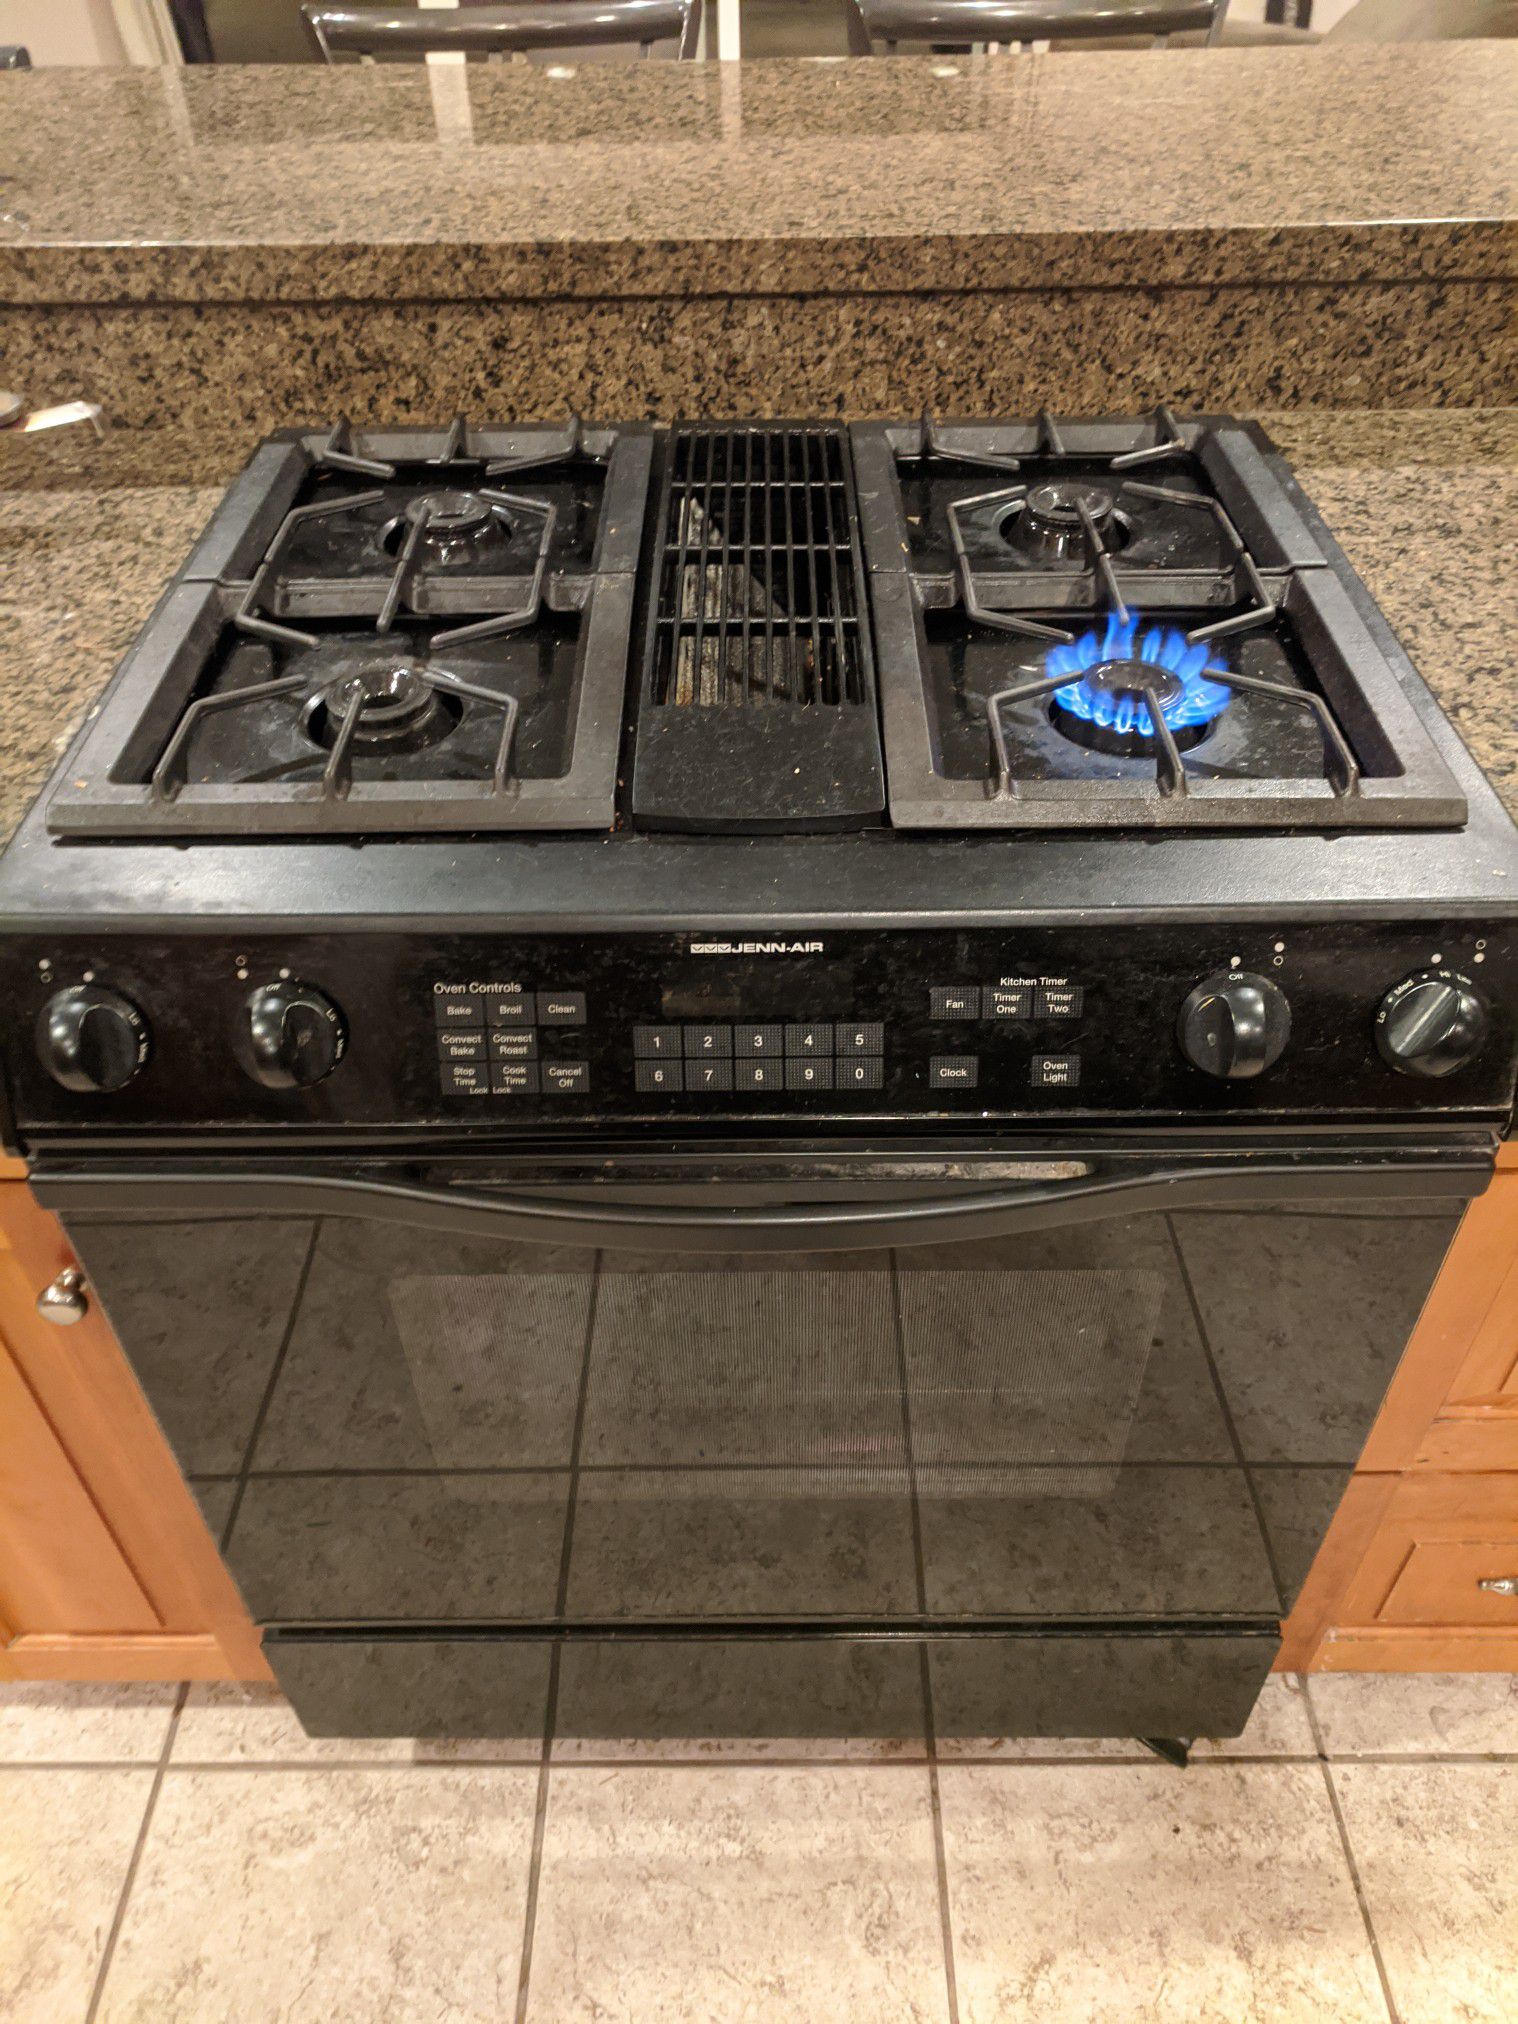 Jenn-air downdraft range (gas) cook-top and electric oven